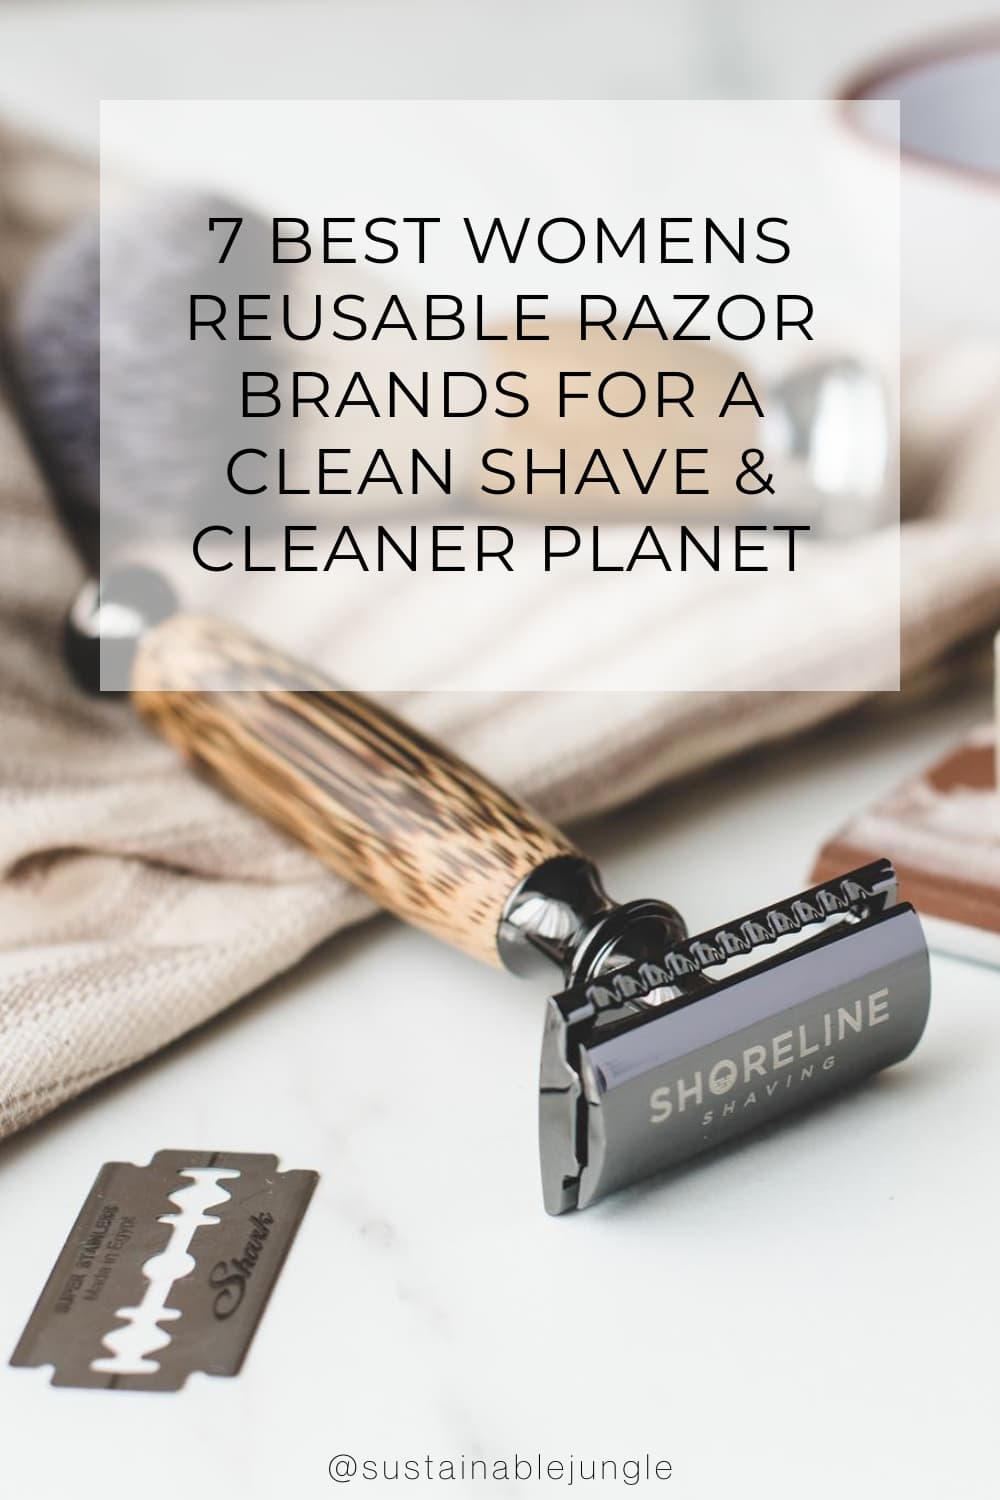 7 Best Womens Reusable Razor Brands For a Clean Shave & Cleaner Planet Image by Shoreline Shaving #womensreusablerazor #bestreusablerazorwomens #bestwomensreusablerazor #bestreusablerazorsforwomen #bestplasticfreerazorsforwomen #sustainablejungle